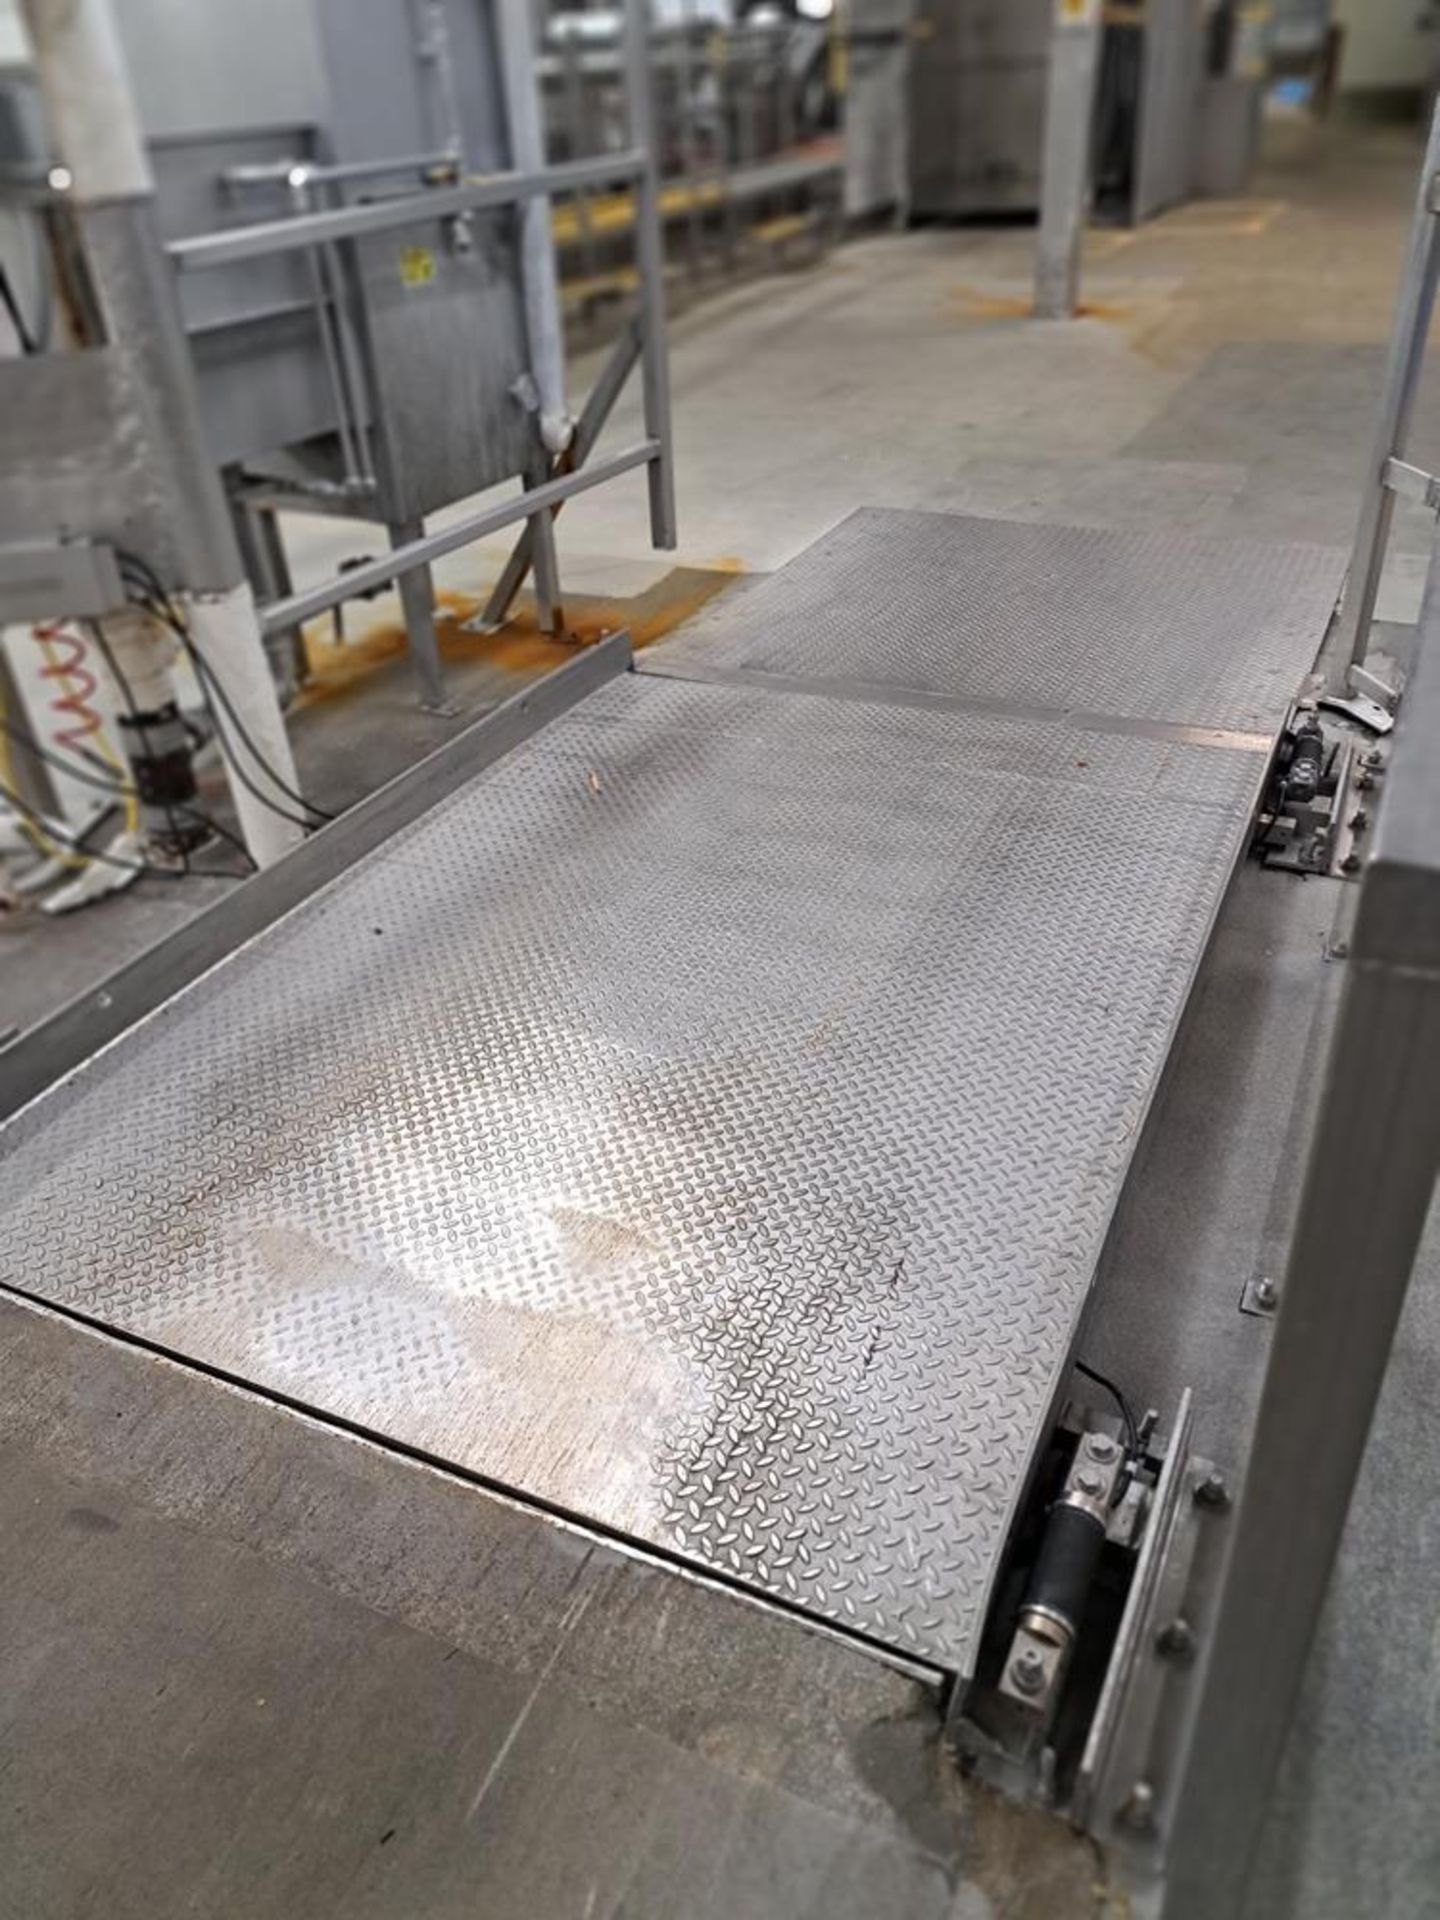 Stainless Steel Floor Scale with ramp, 5' W X 7' L platform, Avery-Weigh-Tronix ZM301 digital - Image 2 of 3